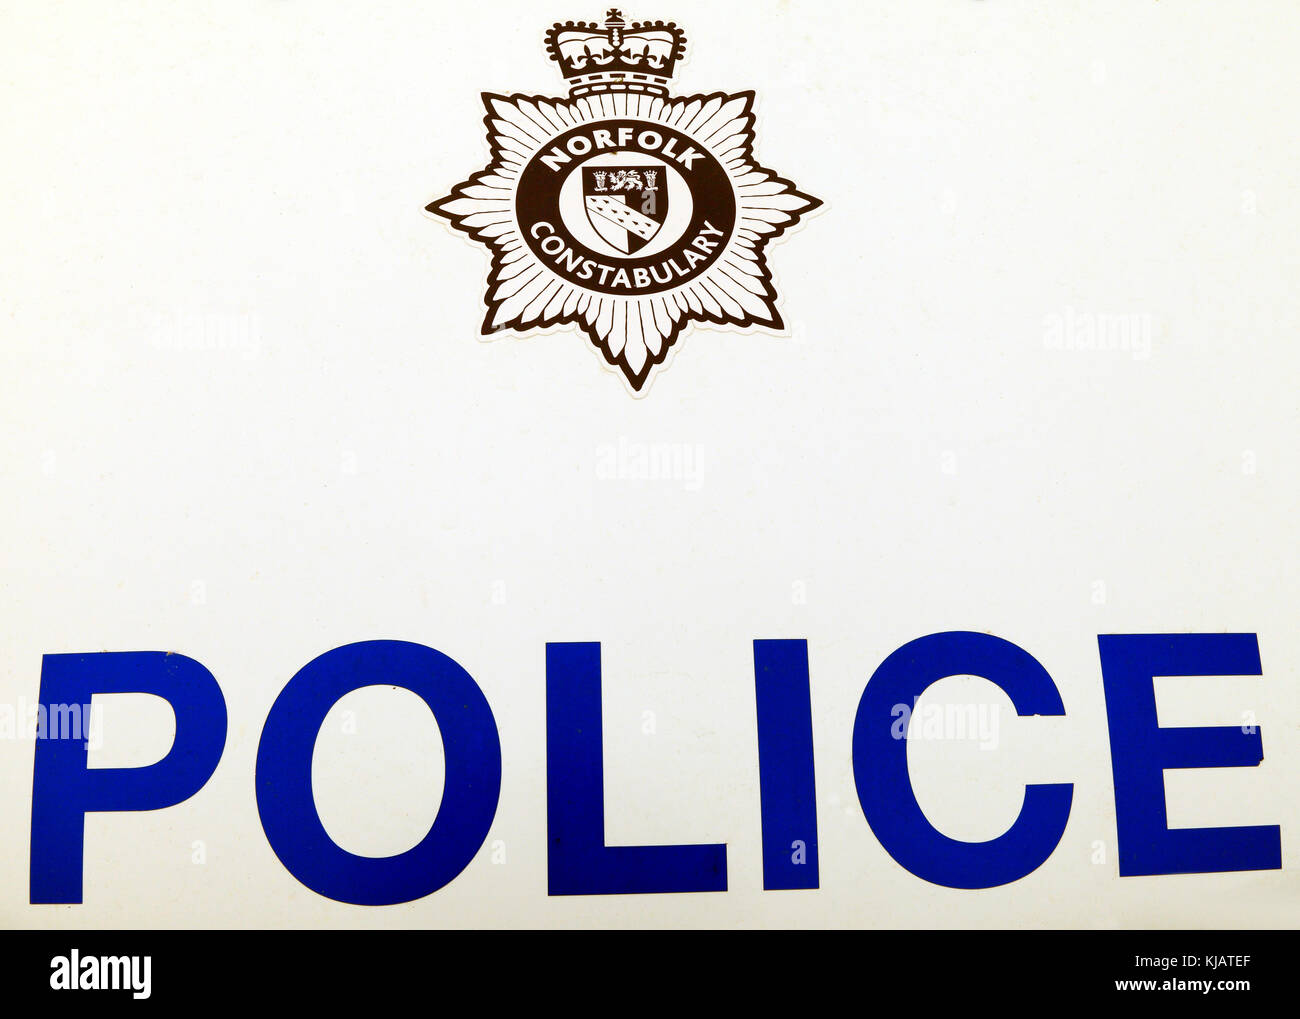 Norfolk Police, car, vehicle, constabulary, police force, forces, vehicles, cars, logo Stock Photo